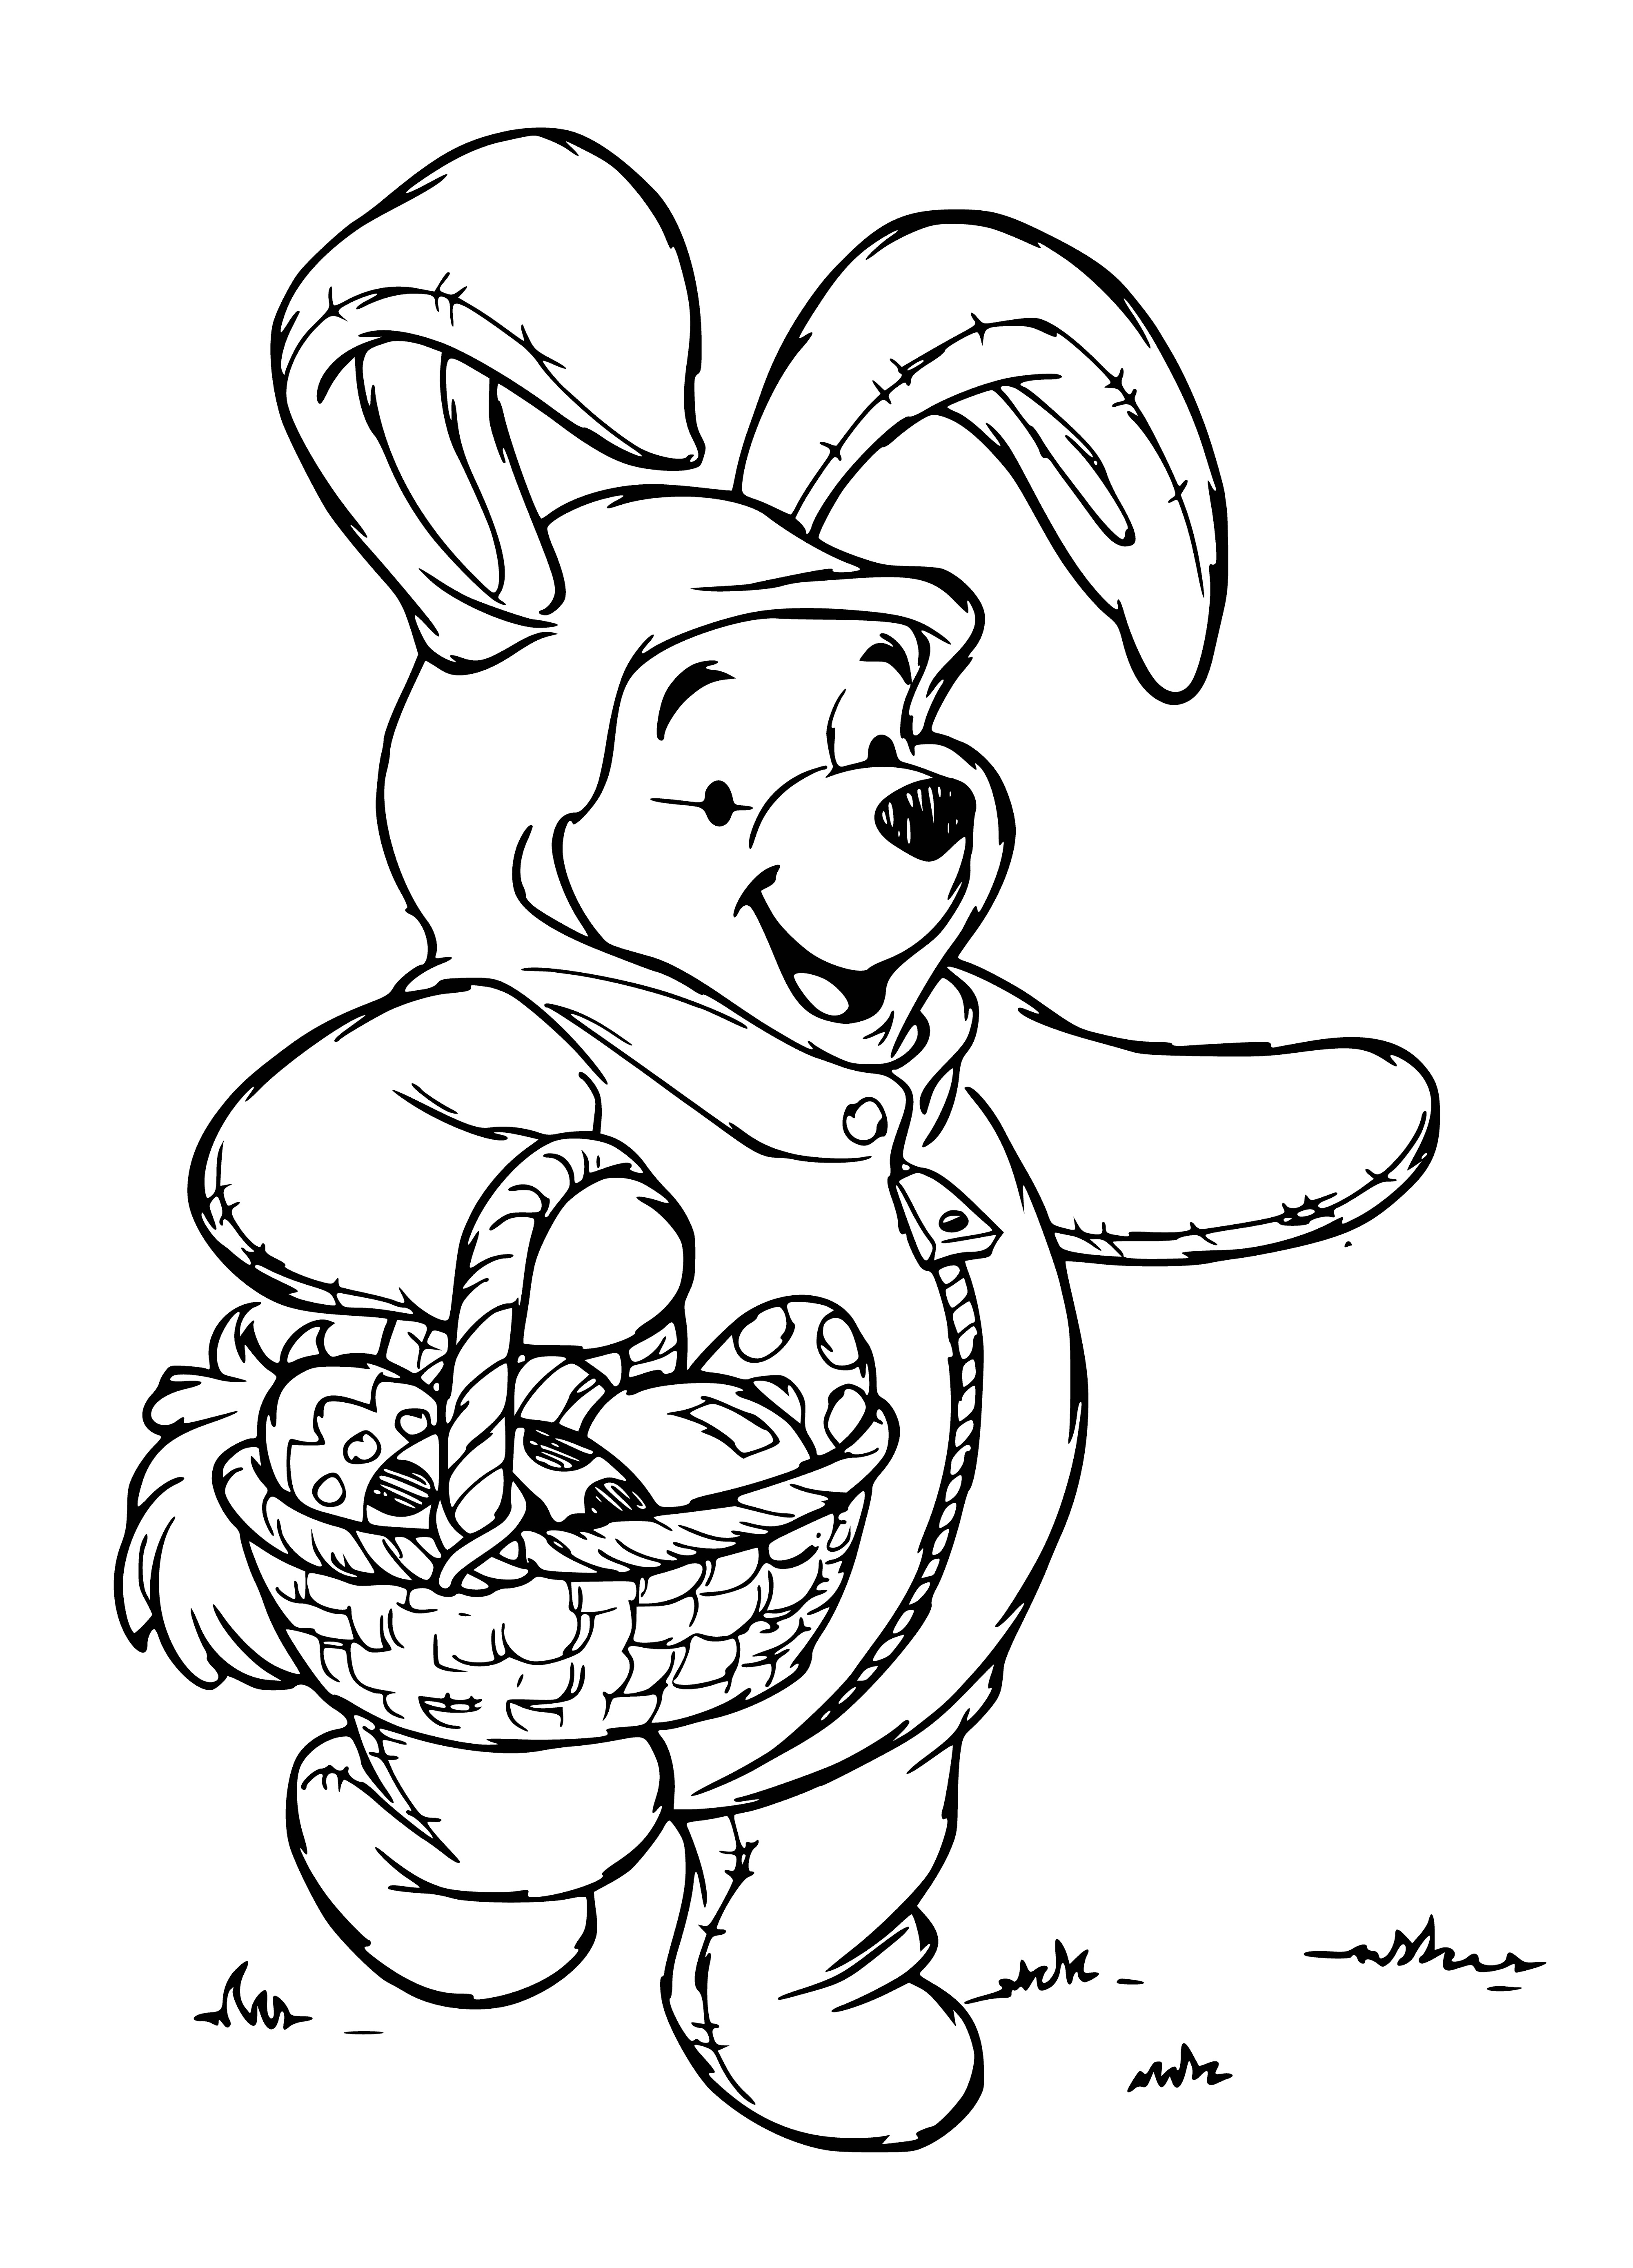 coloring page: In the left corner, a bear stands & holds an Easter egg; right corner, a rabbit holds a basket of eggs.